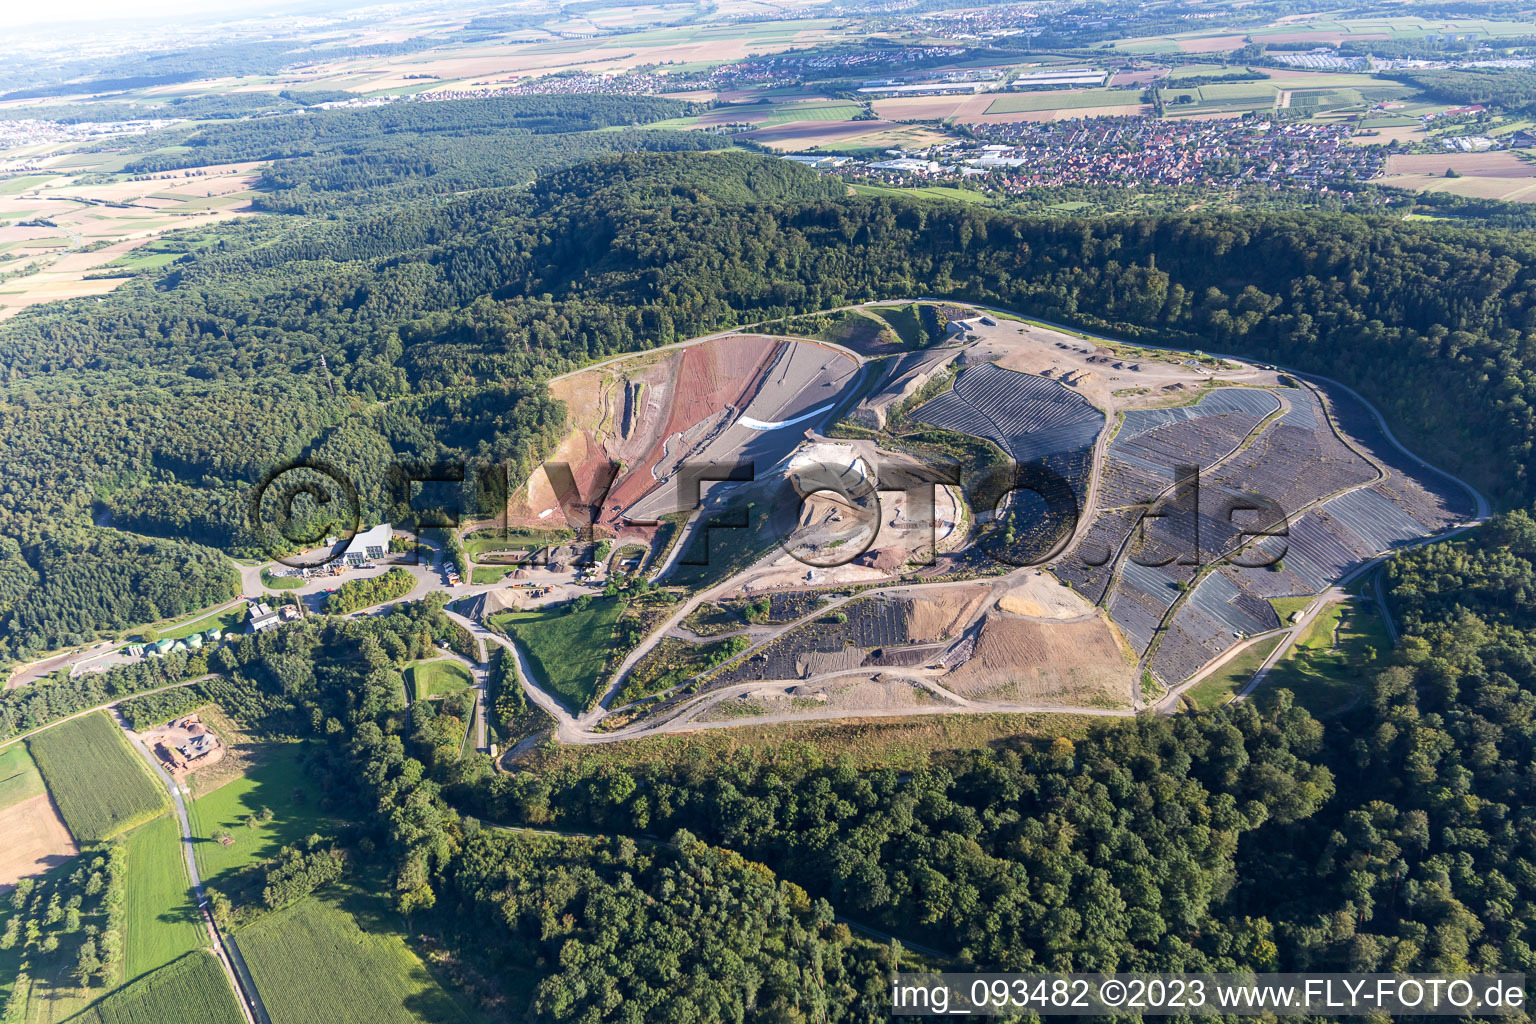 Aerial view of AVL landfill BURGHOF in the district Gündelbach in Vaihingen an der Enz in the state Baden-Wuerttemberg, Germany